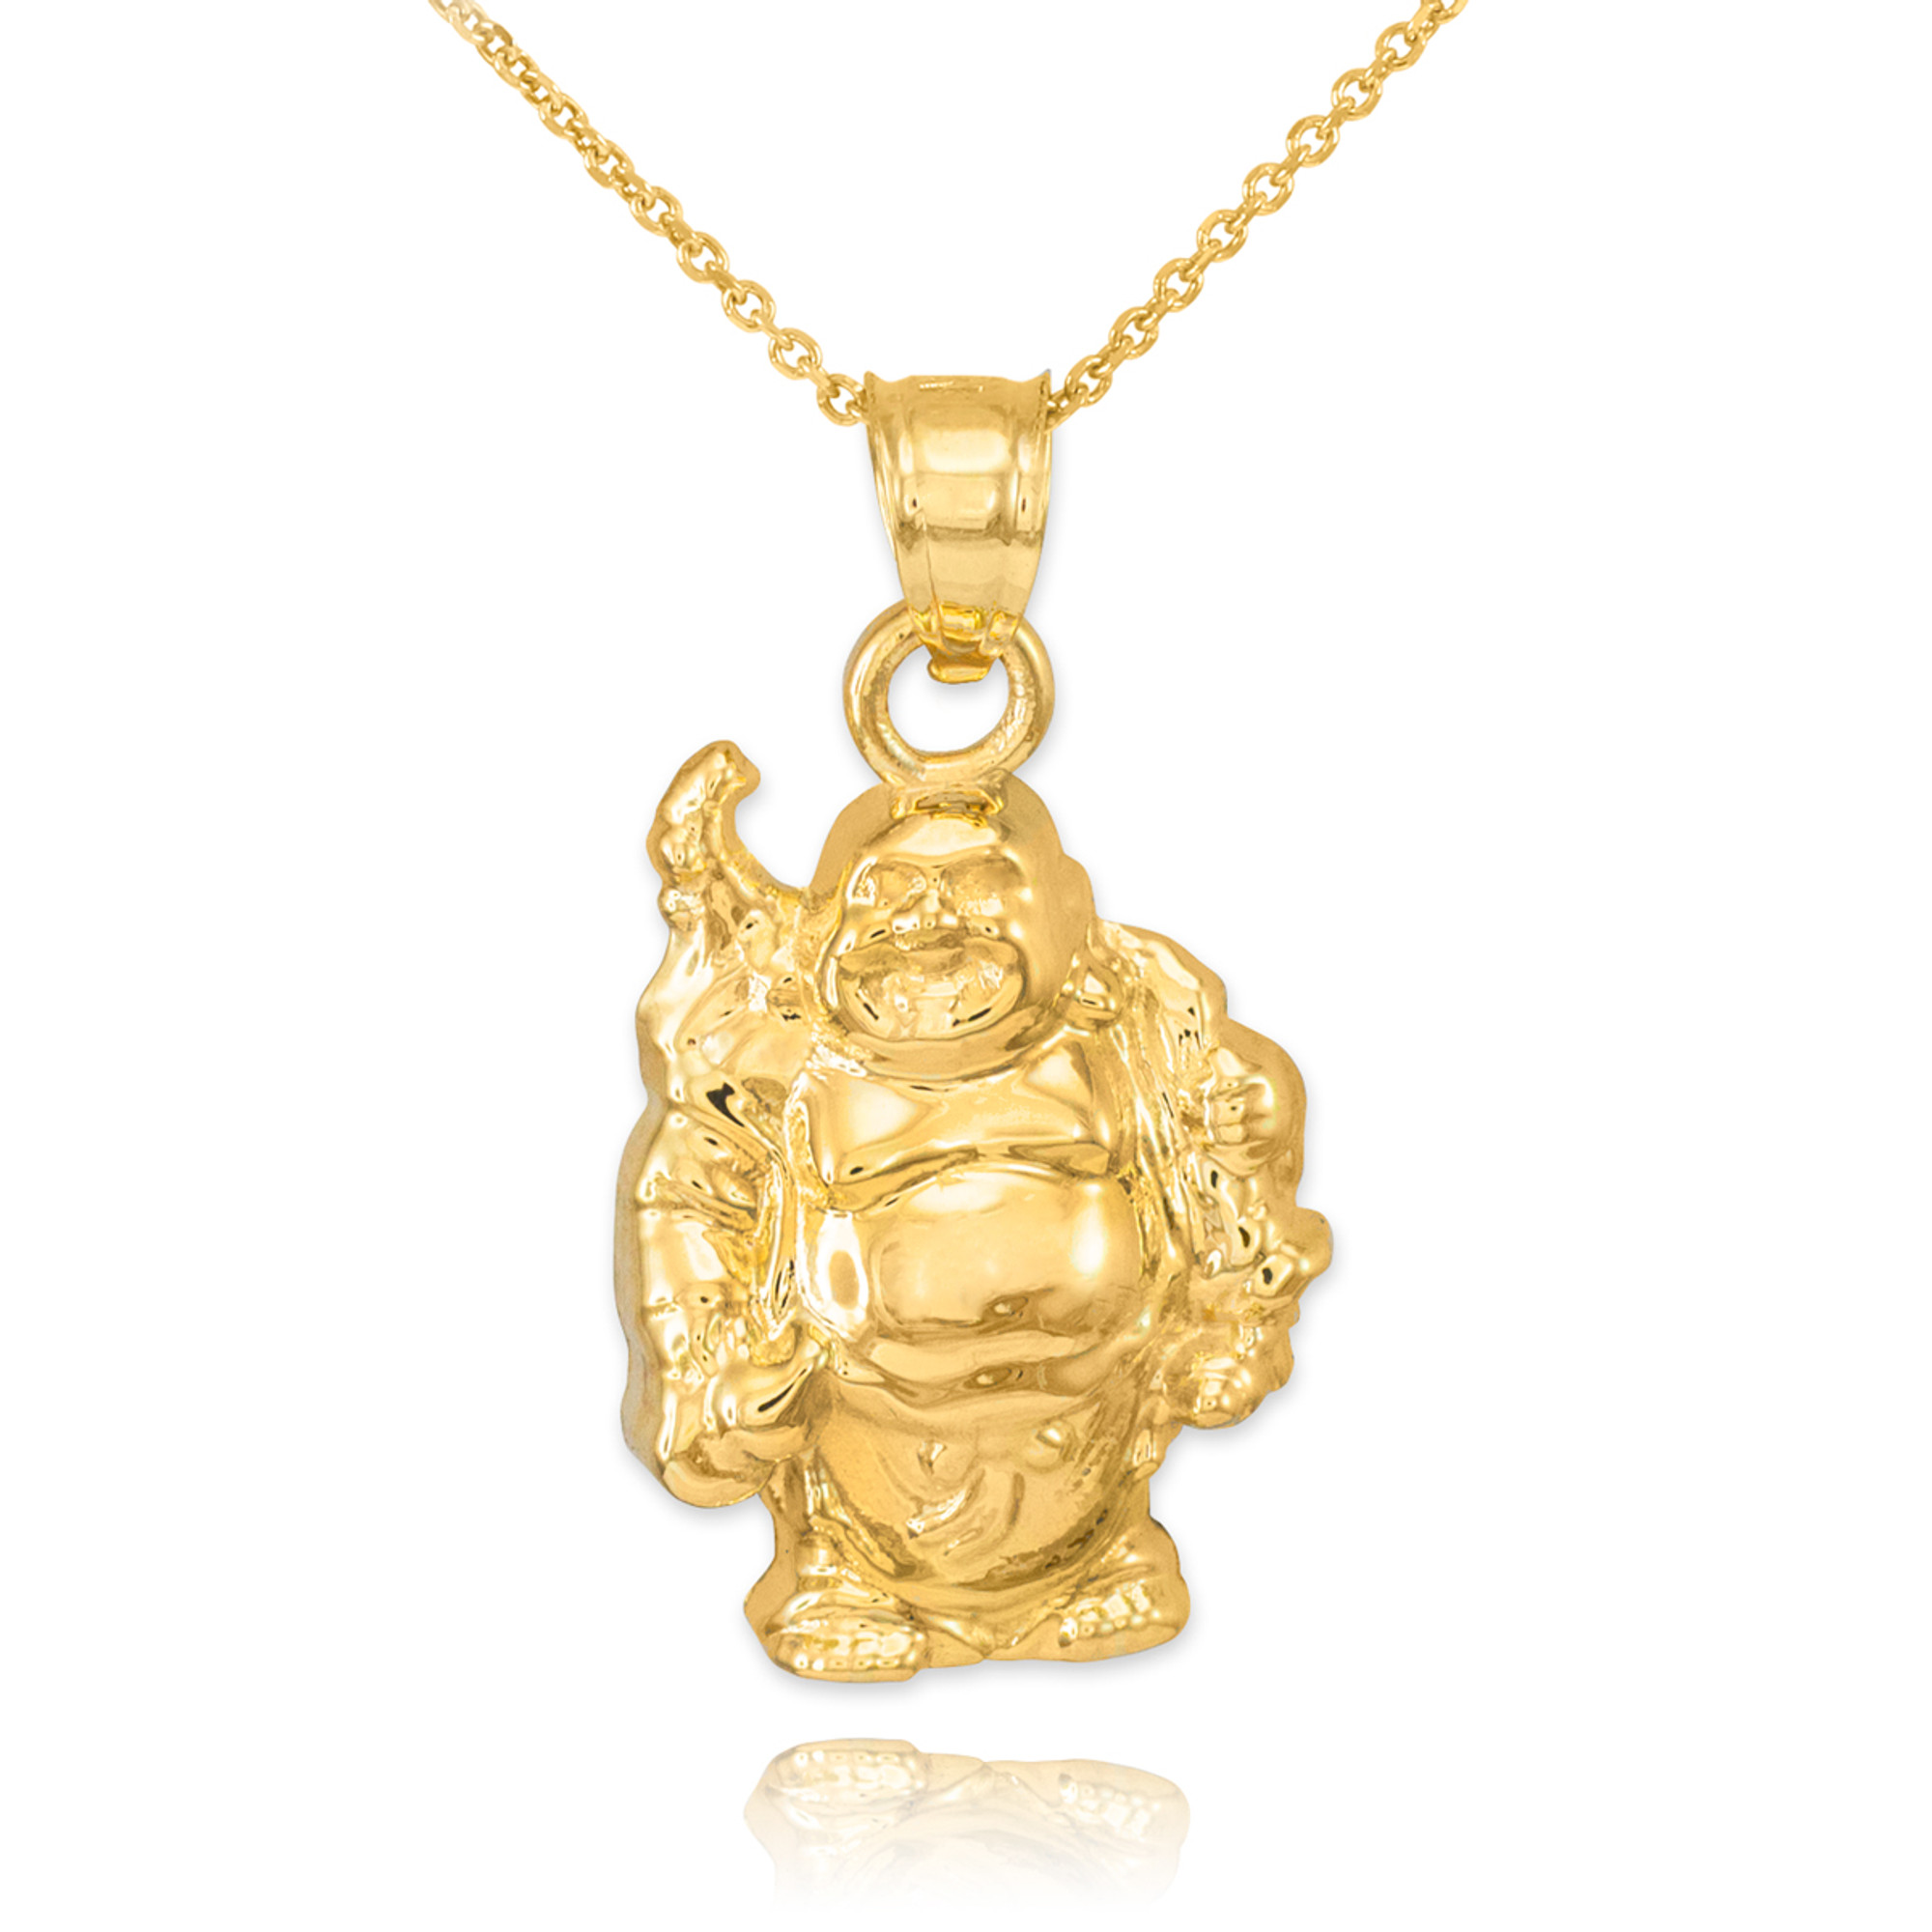 Buy Buddha Necklace Gold Buddha Necklace Yoga Necklace Gautama Buddha a Gold  Vermeil Buddha on a 14k Gold Filled Chain Online in India - Etsy